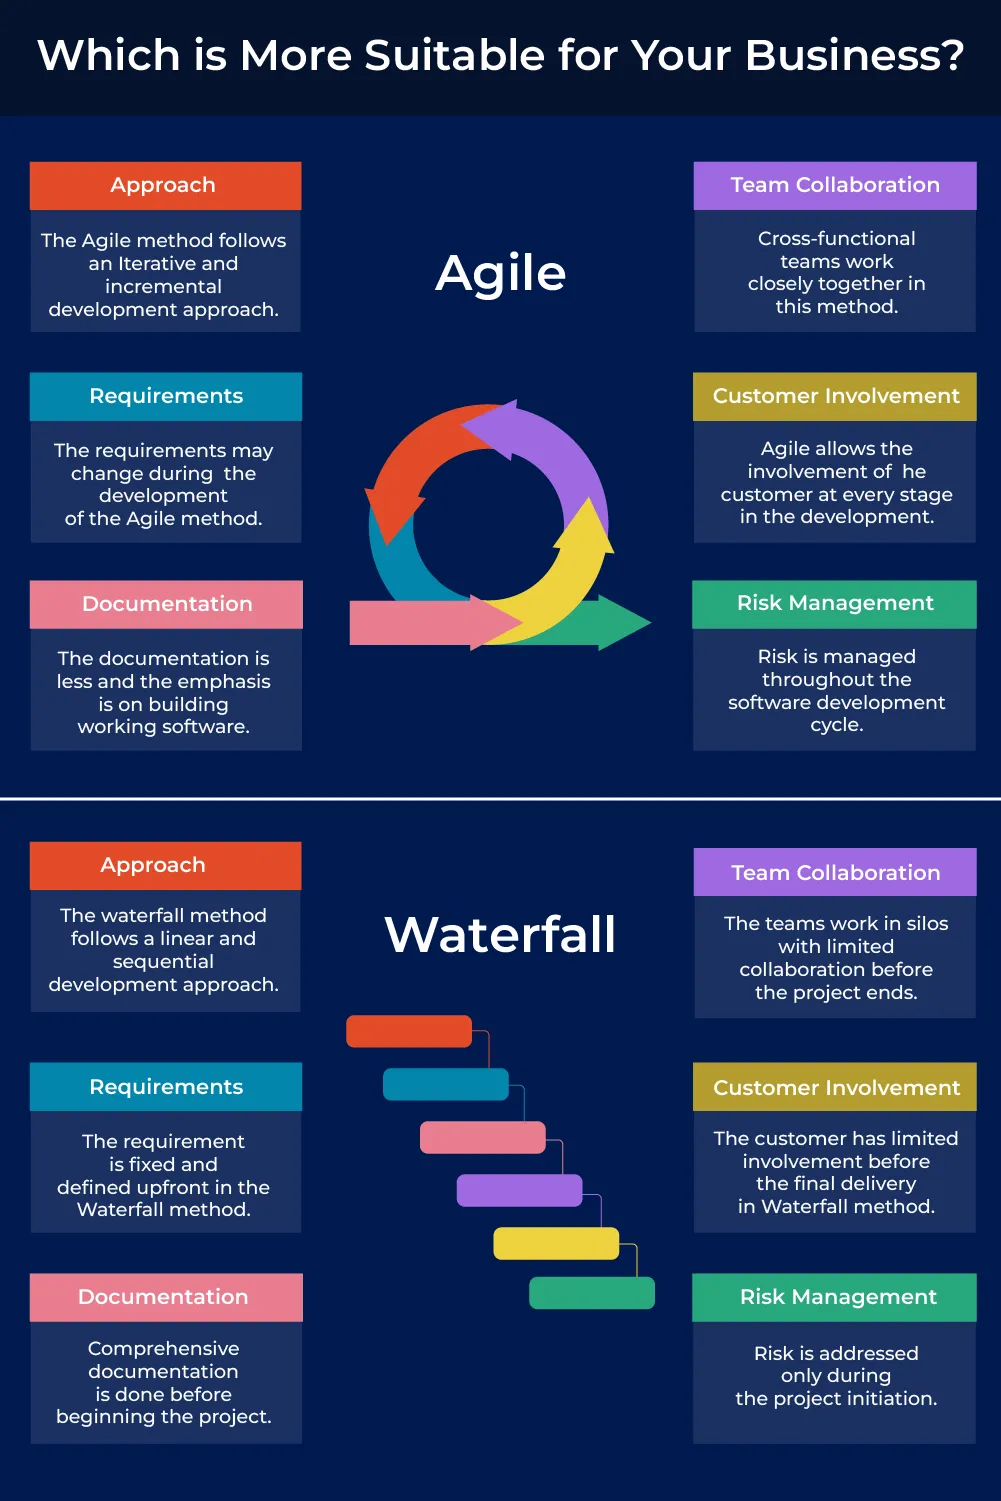 A Visual representation of difference between Agile Method and Waterfall Method.